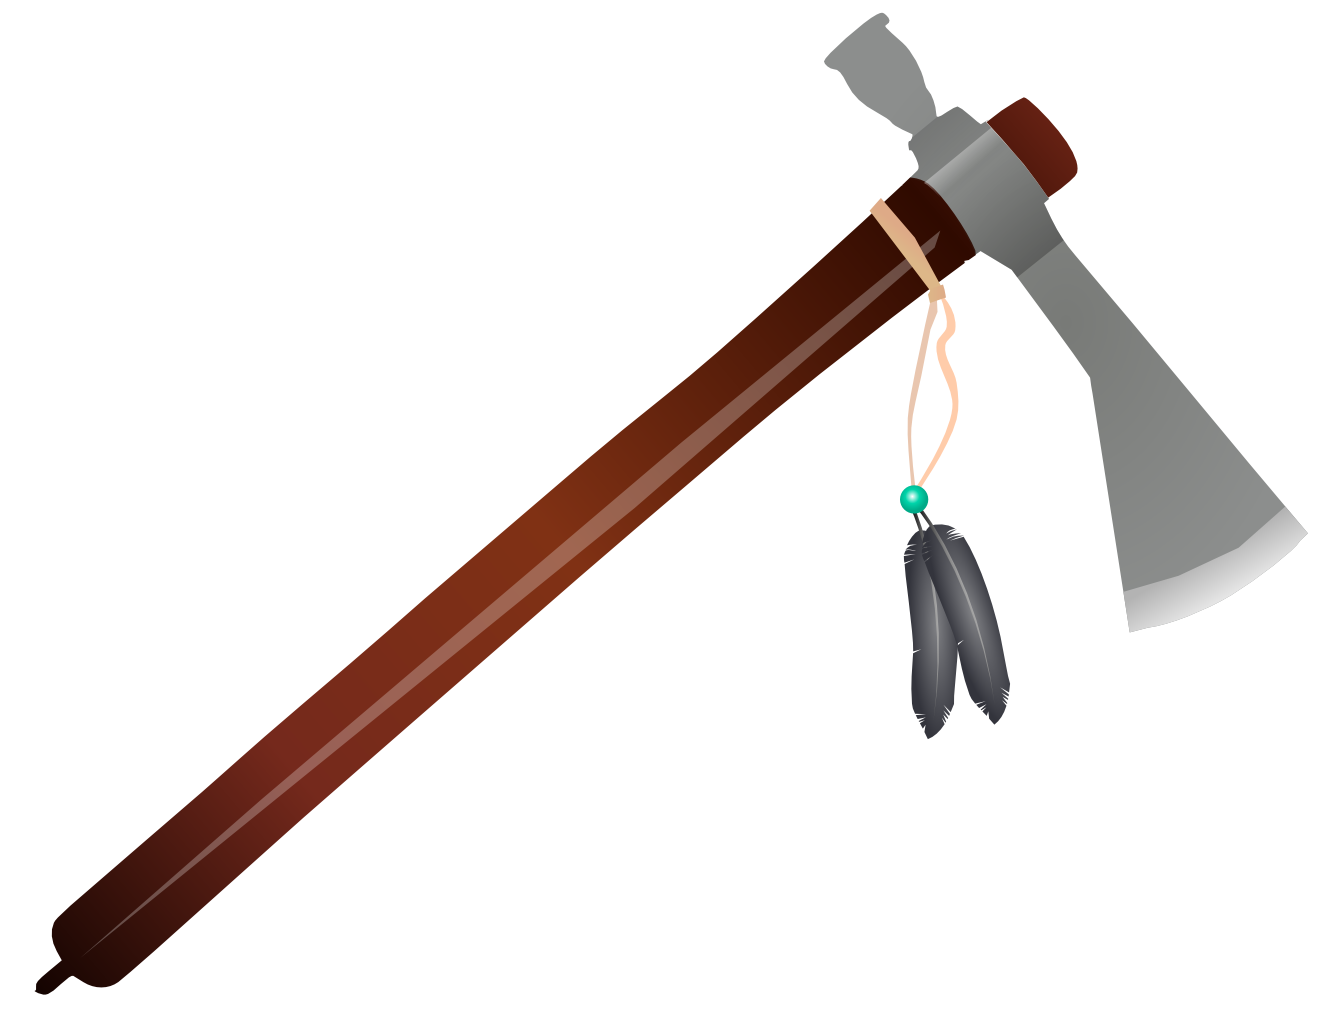 Tomahawk 20clipart - Free Clipart Images